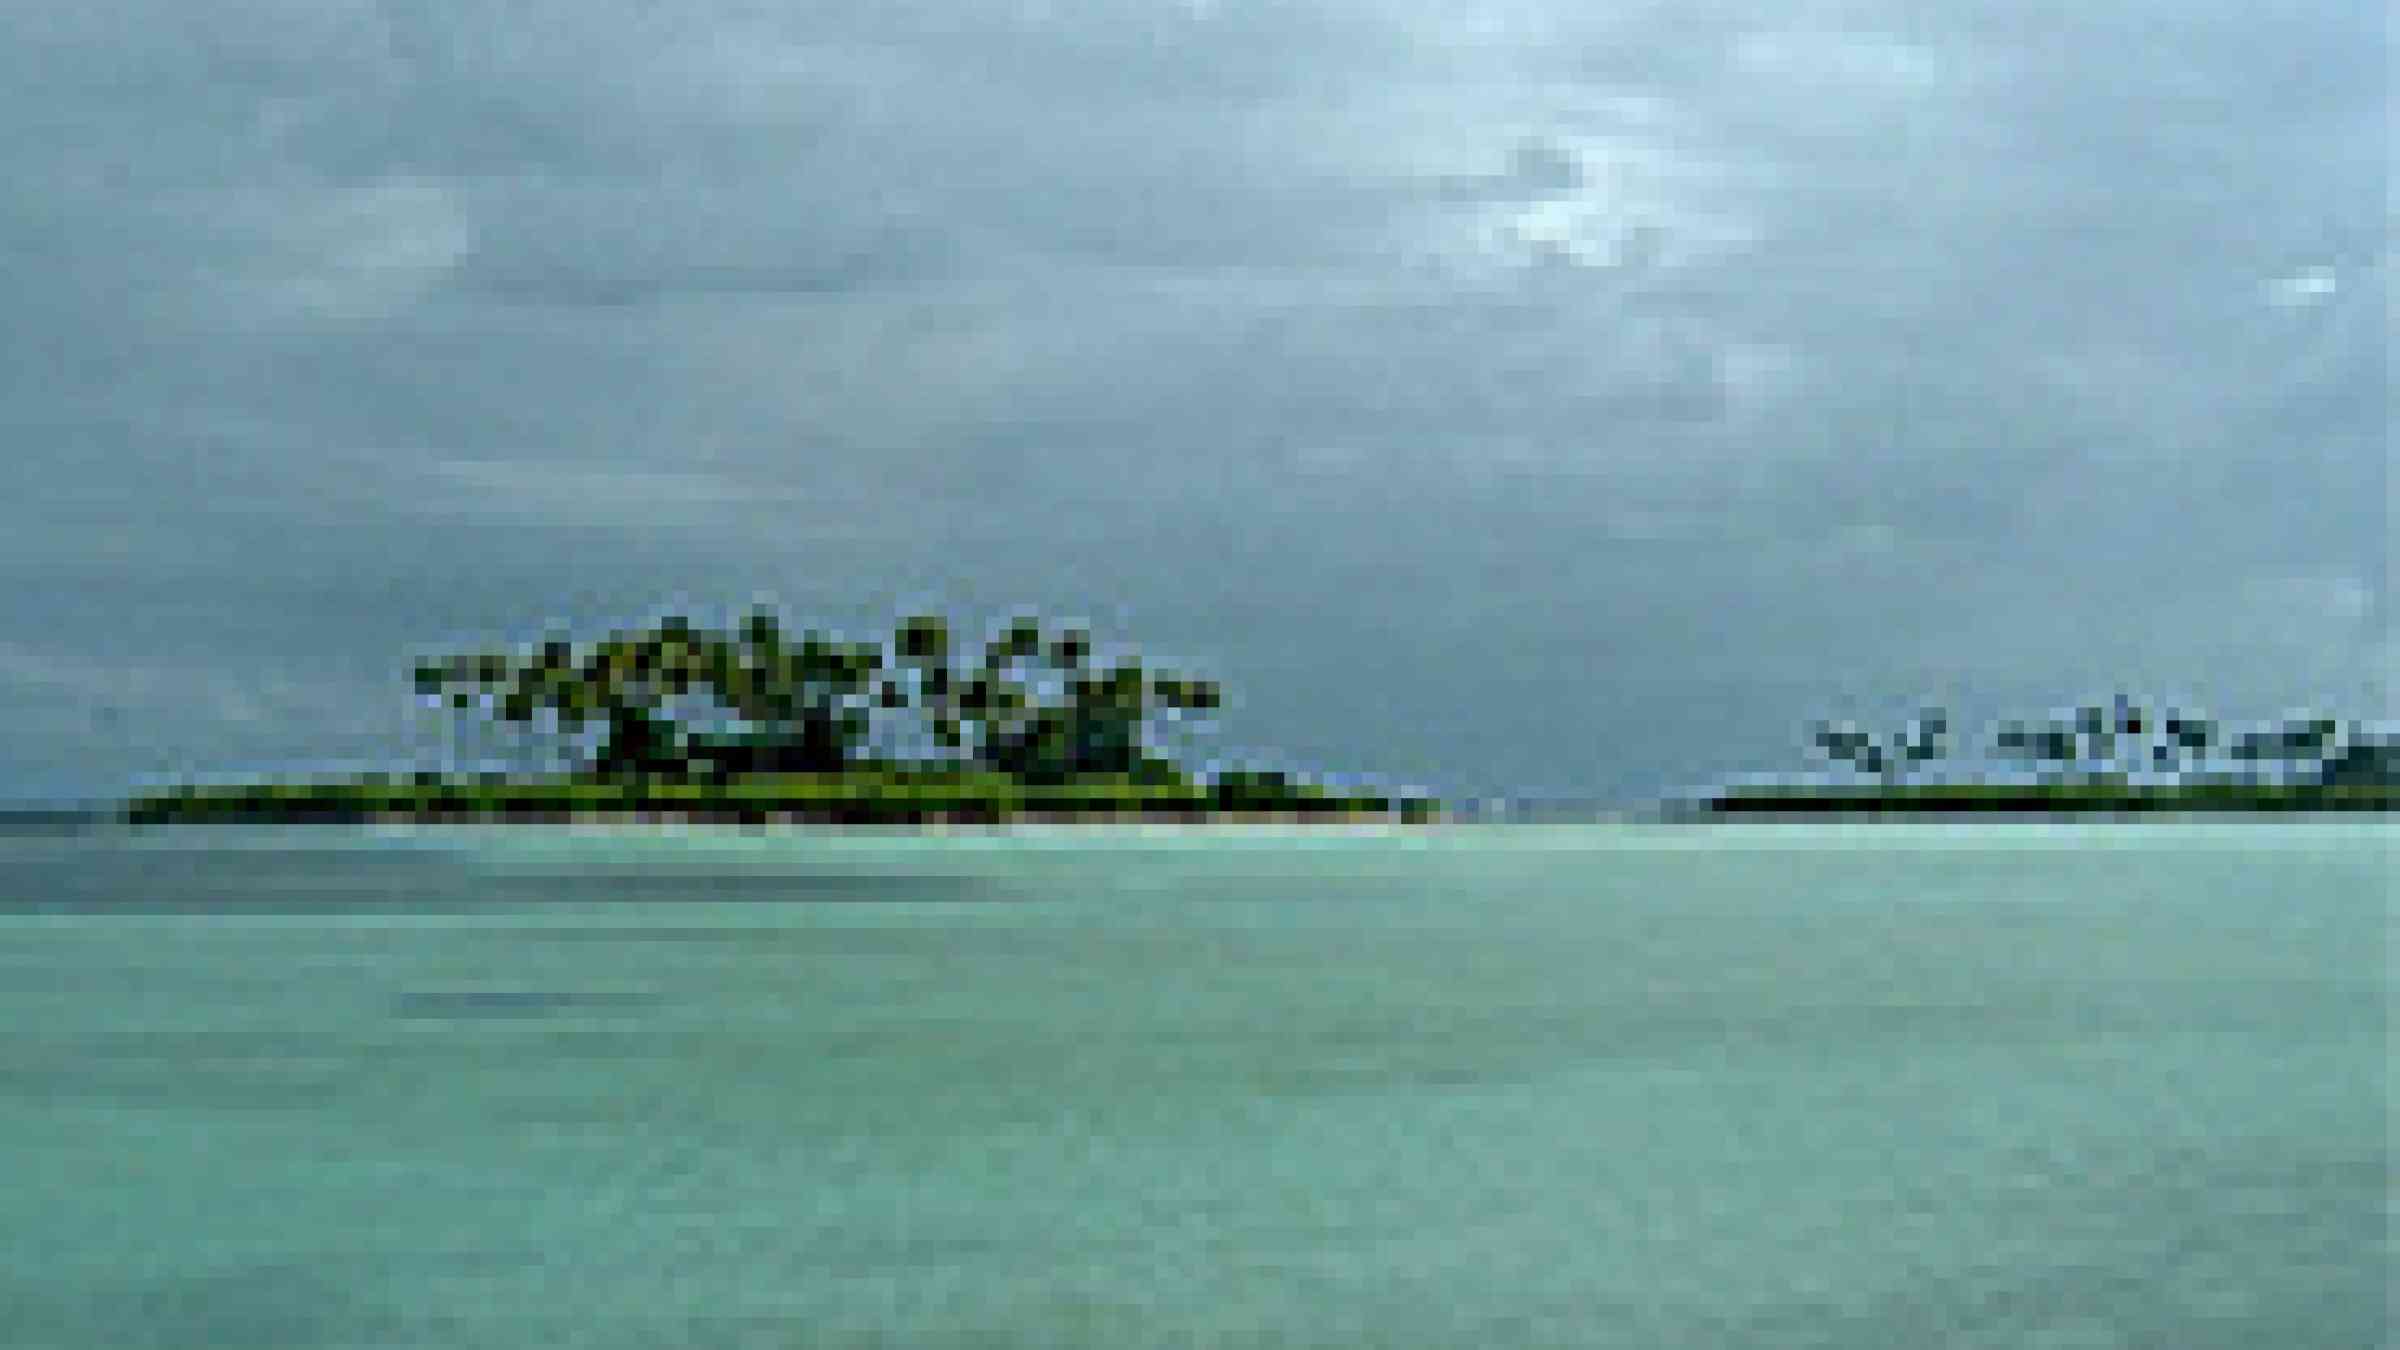 An atoll in the Rep. of Kiribati by Flickr user, luigig, Creative Commons Attribution 2.0 Generic, http://www.flickr.com/photos/luigi_and_linda/2570411802/